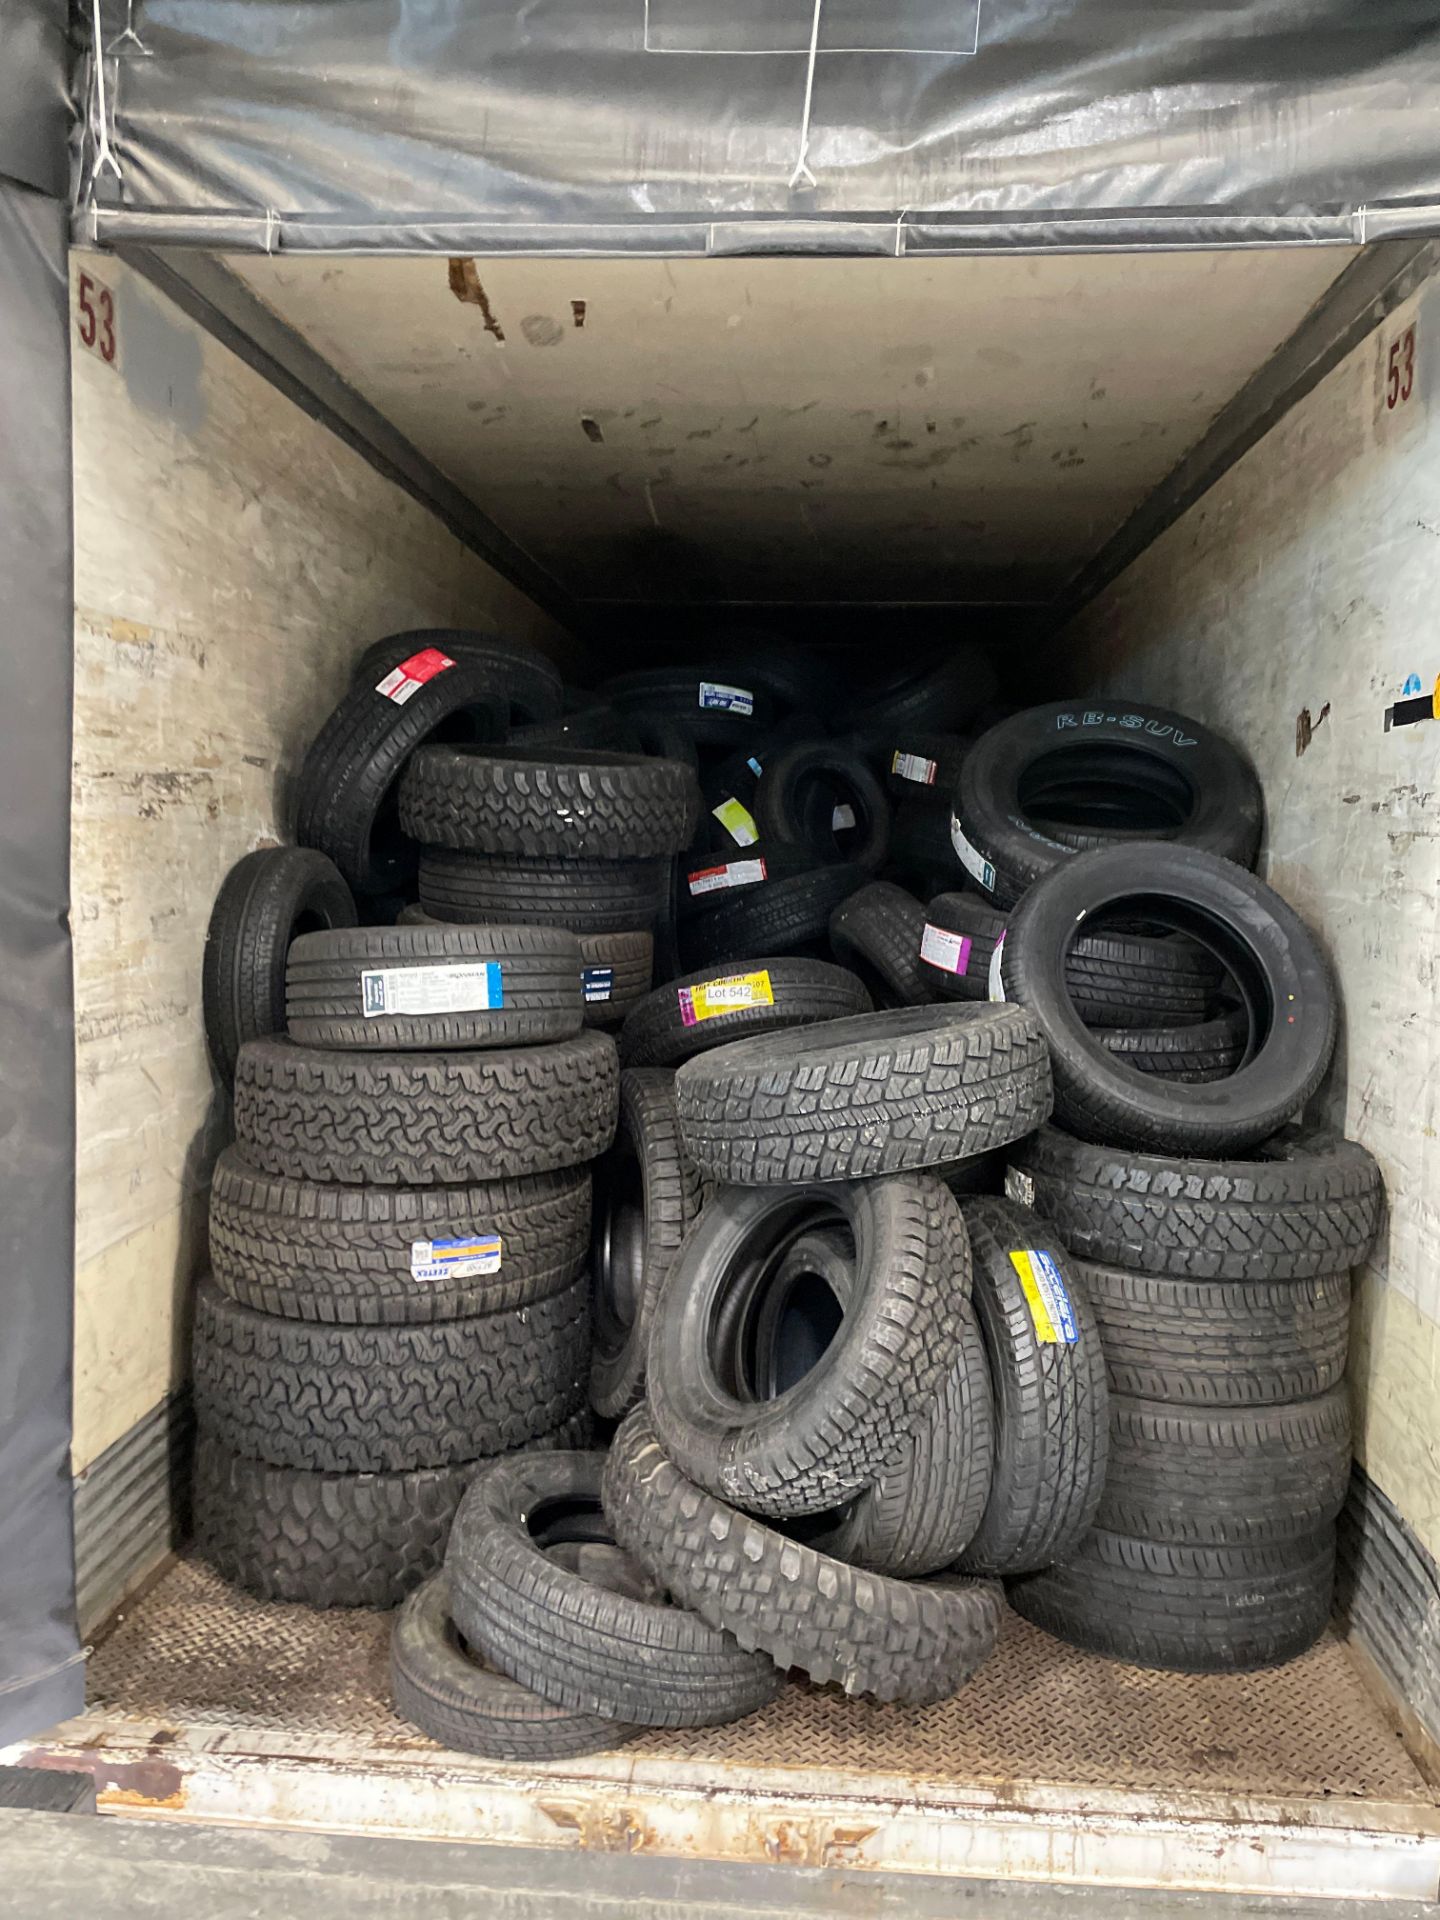 Semi of tires approx 550